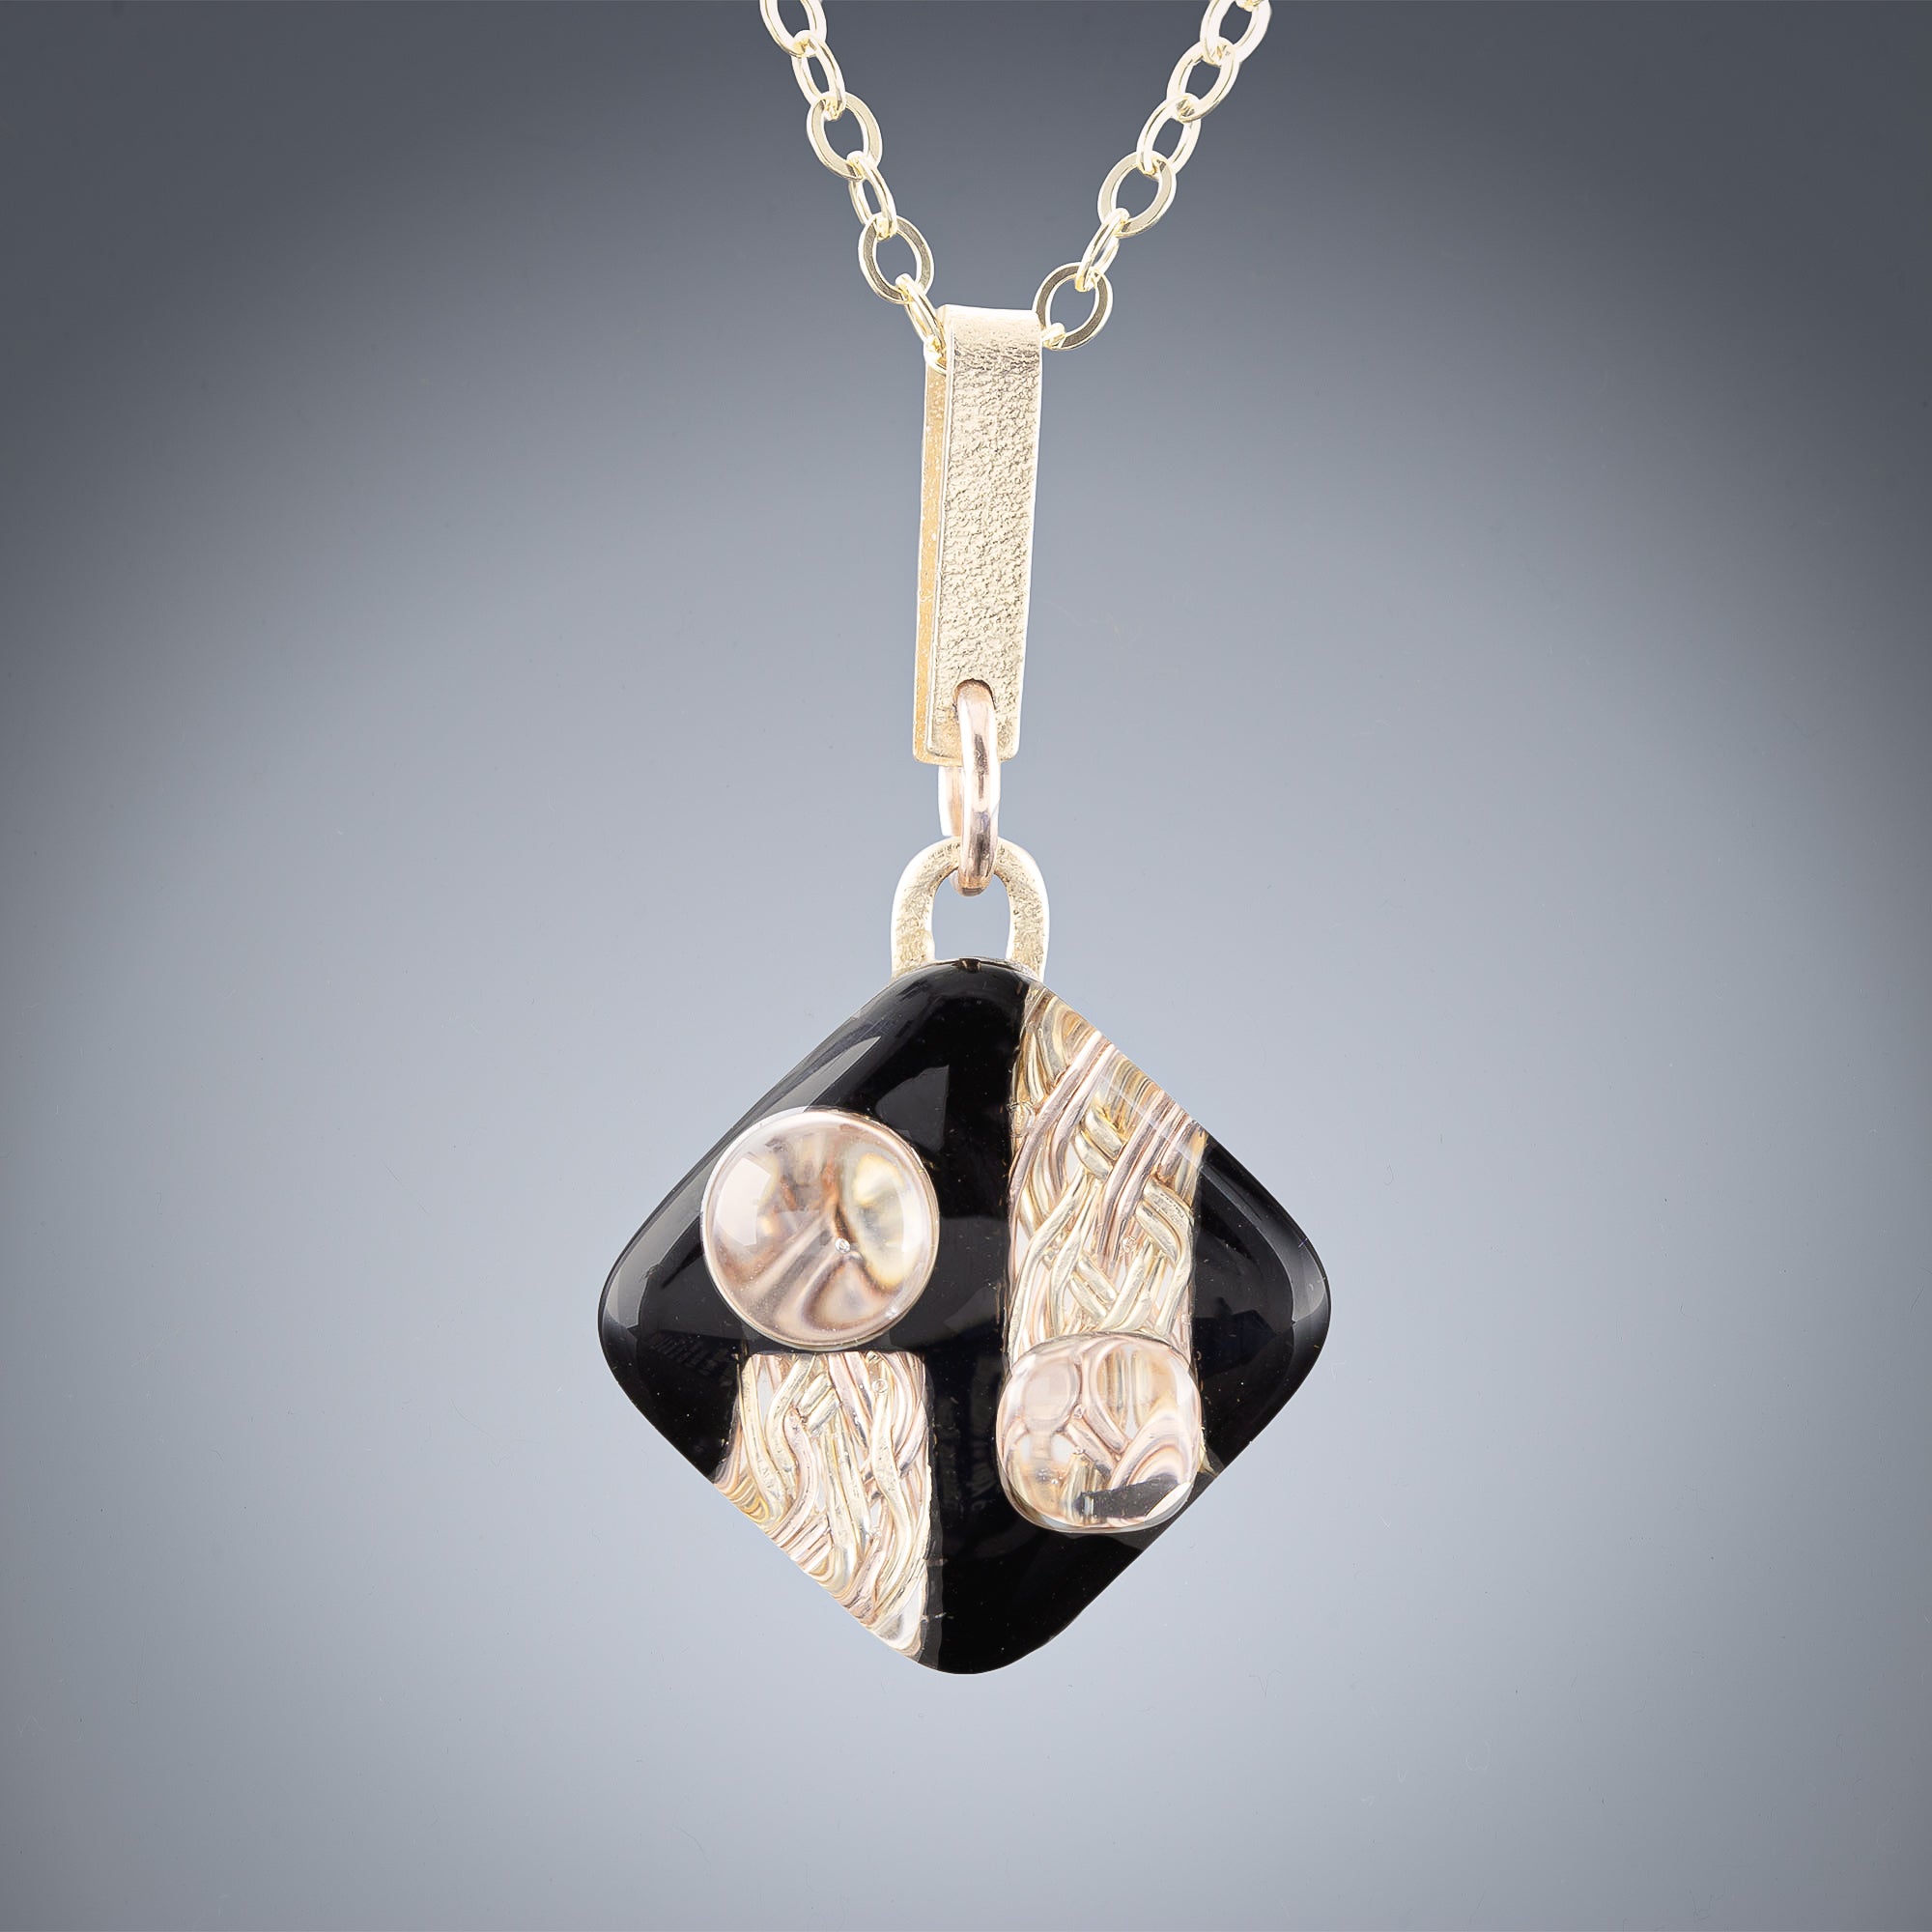 Medium Black and Gold Art Deco Inspired Pendant Necklace in both 14K Yellow and Rose Gold Fill